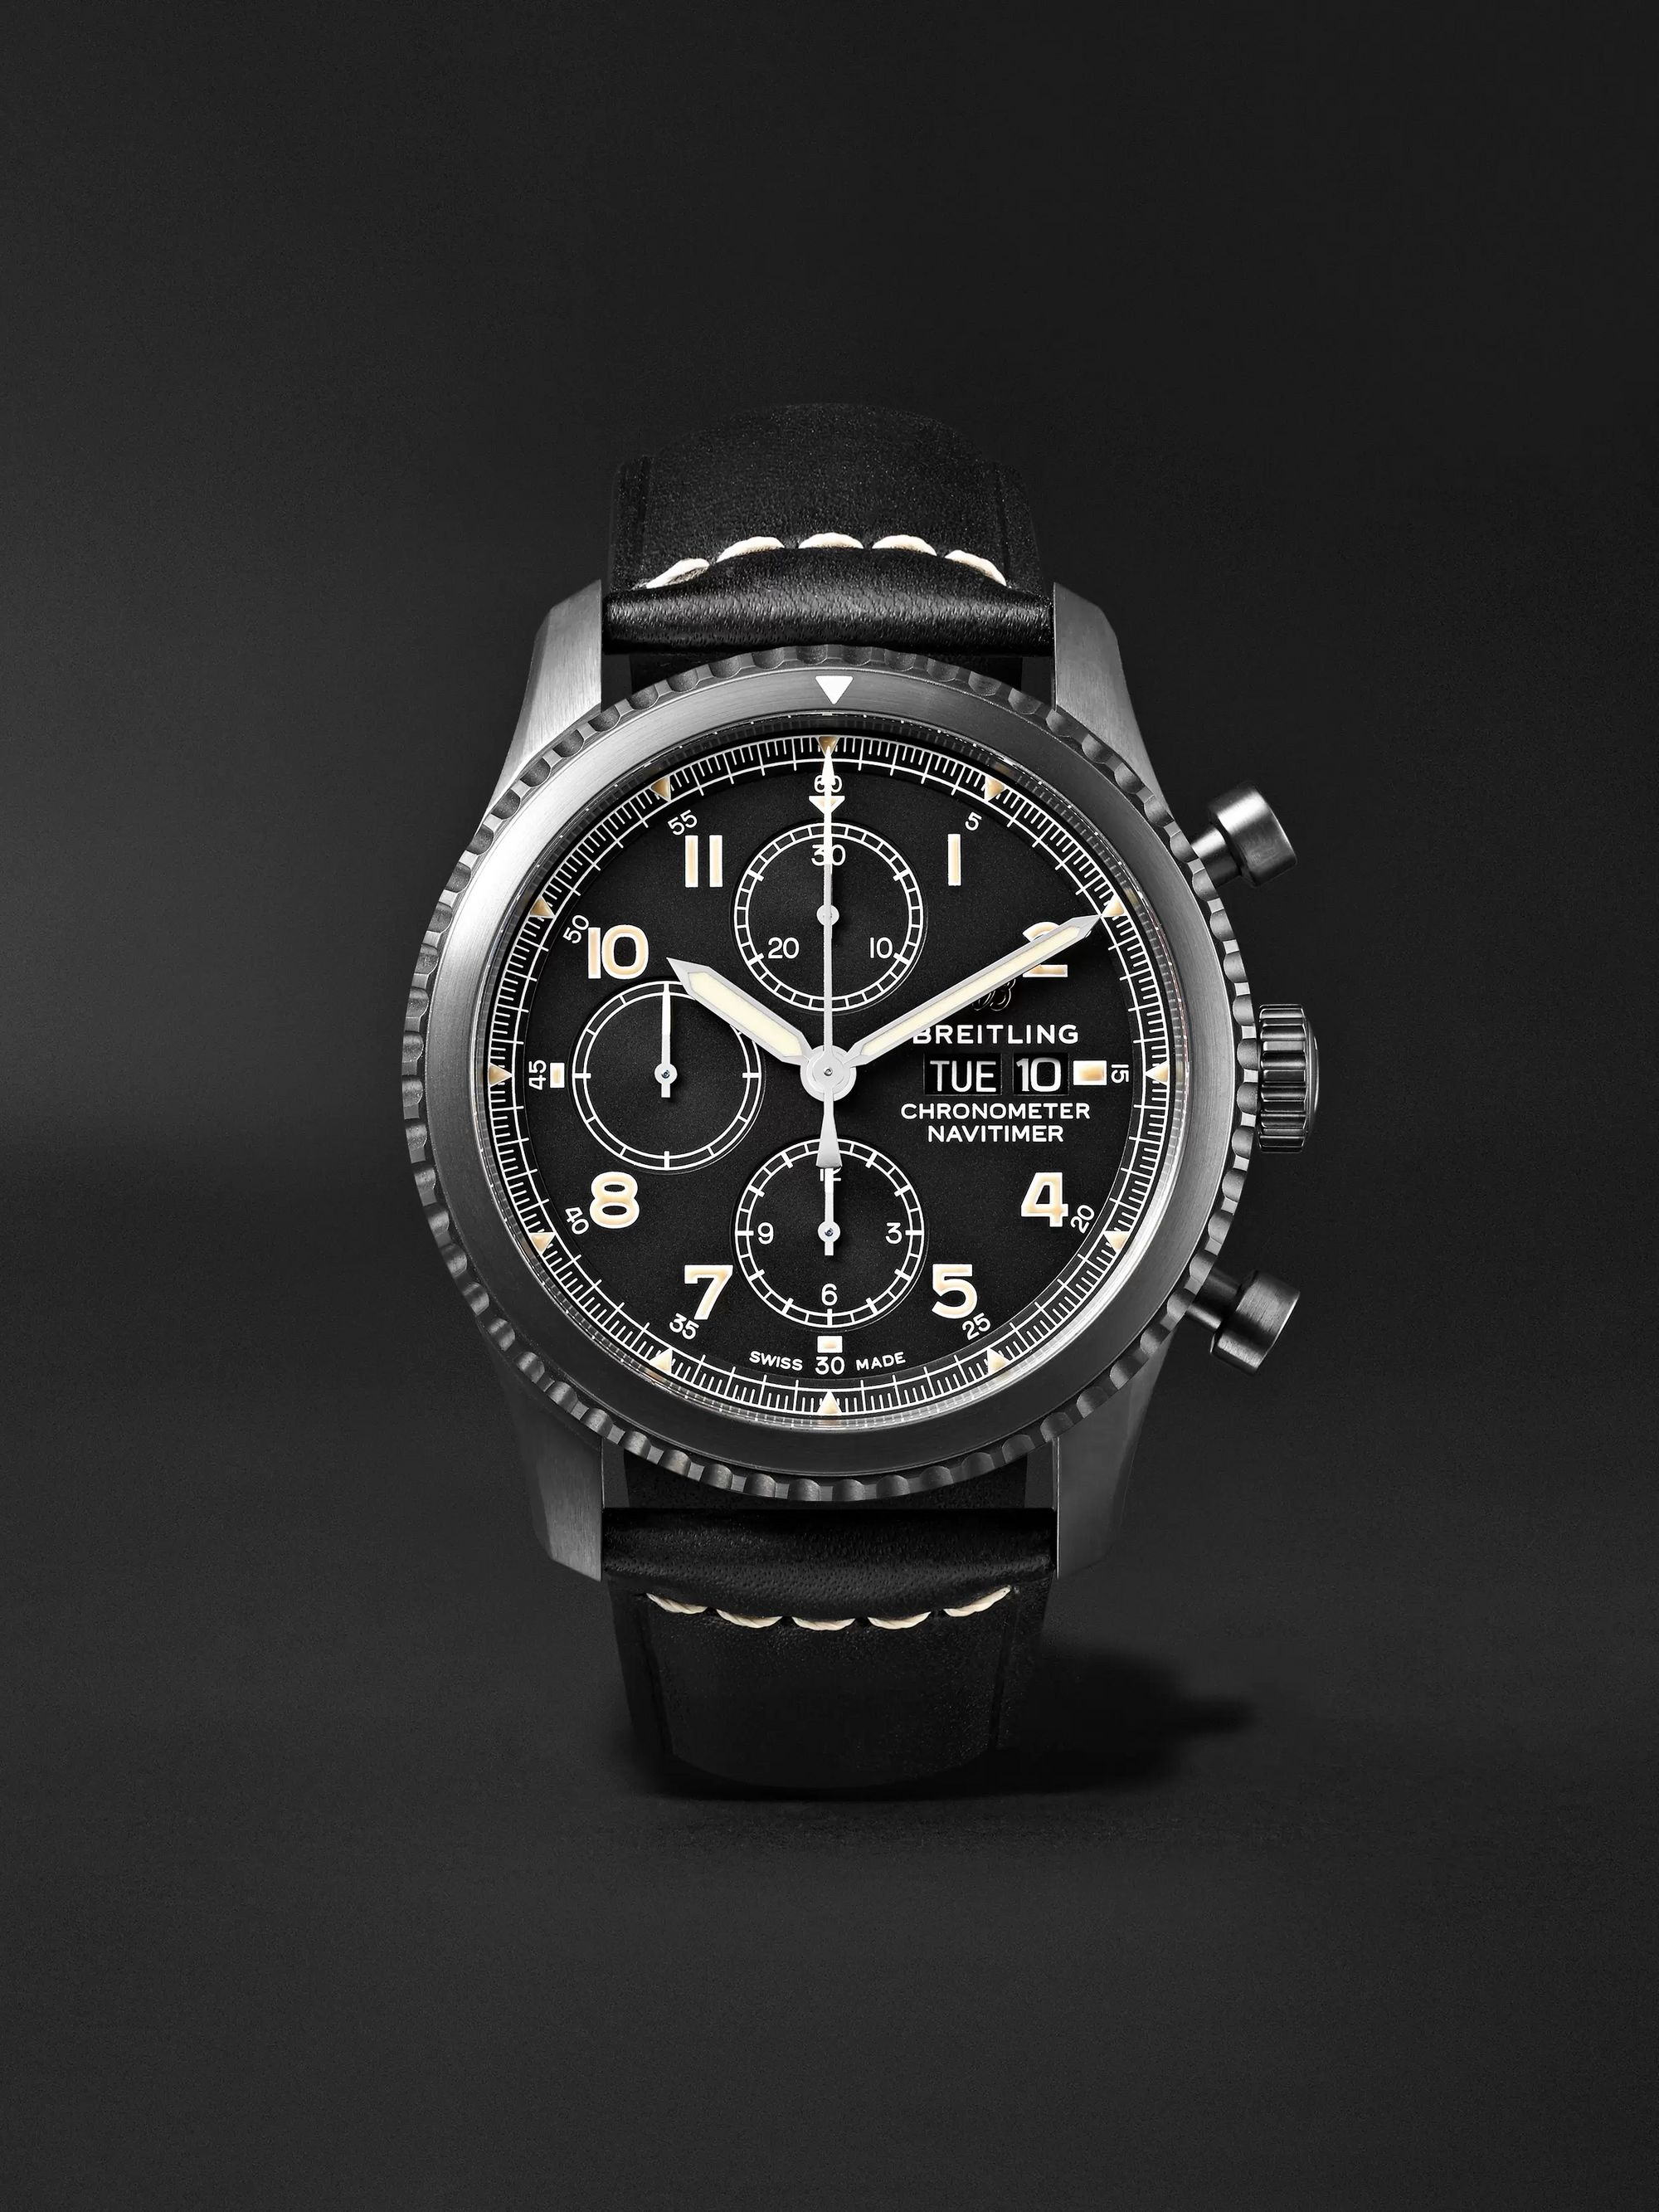 Navitimer 8 Automatic Chronograph 43mm Black Steel and Leather Watch, Ref.  No. M13314101B1X1